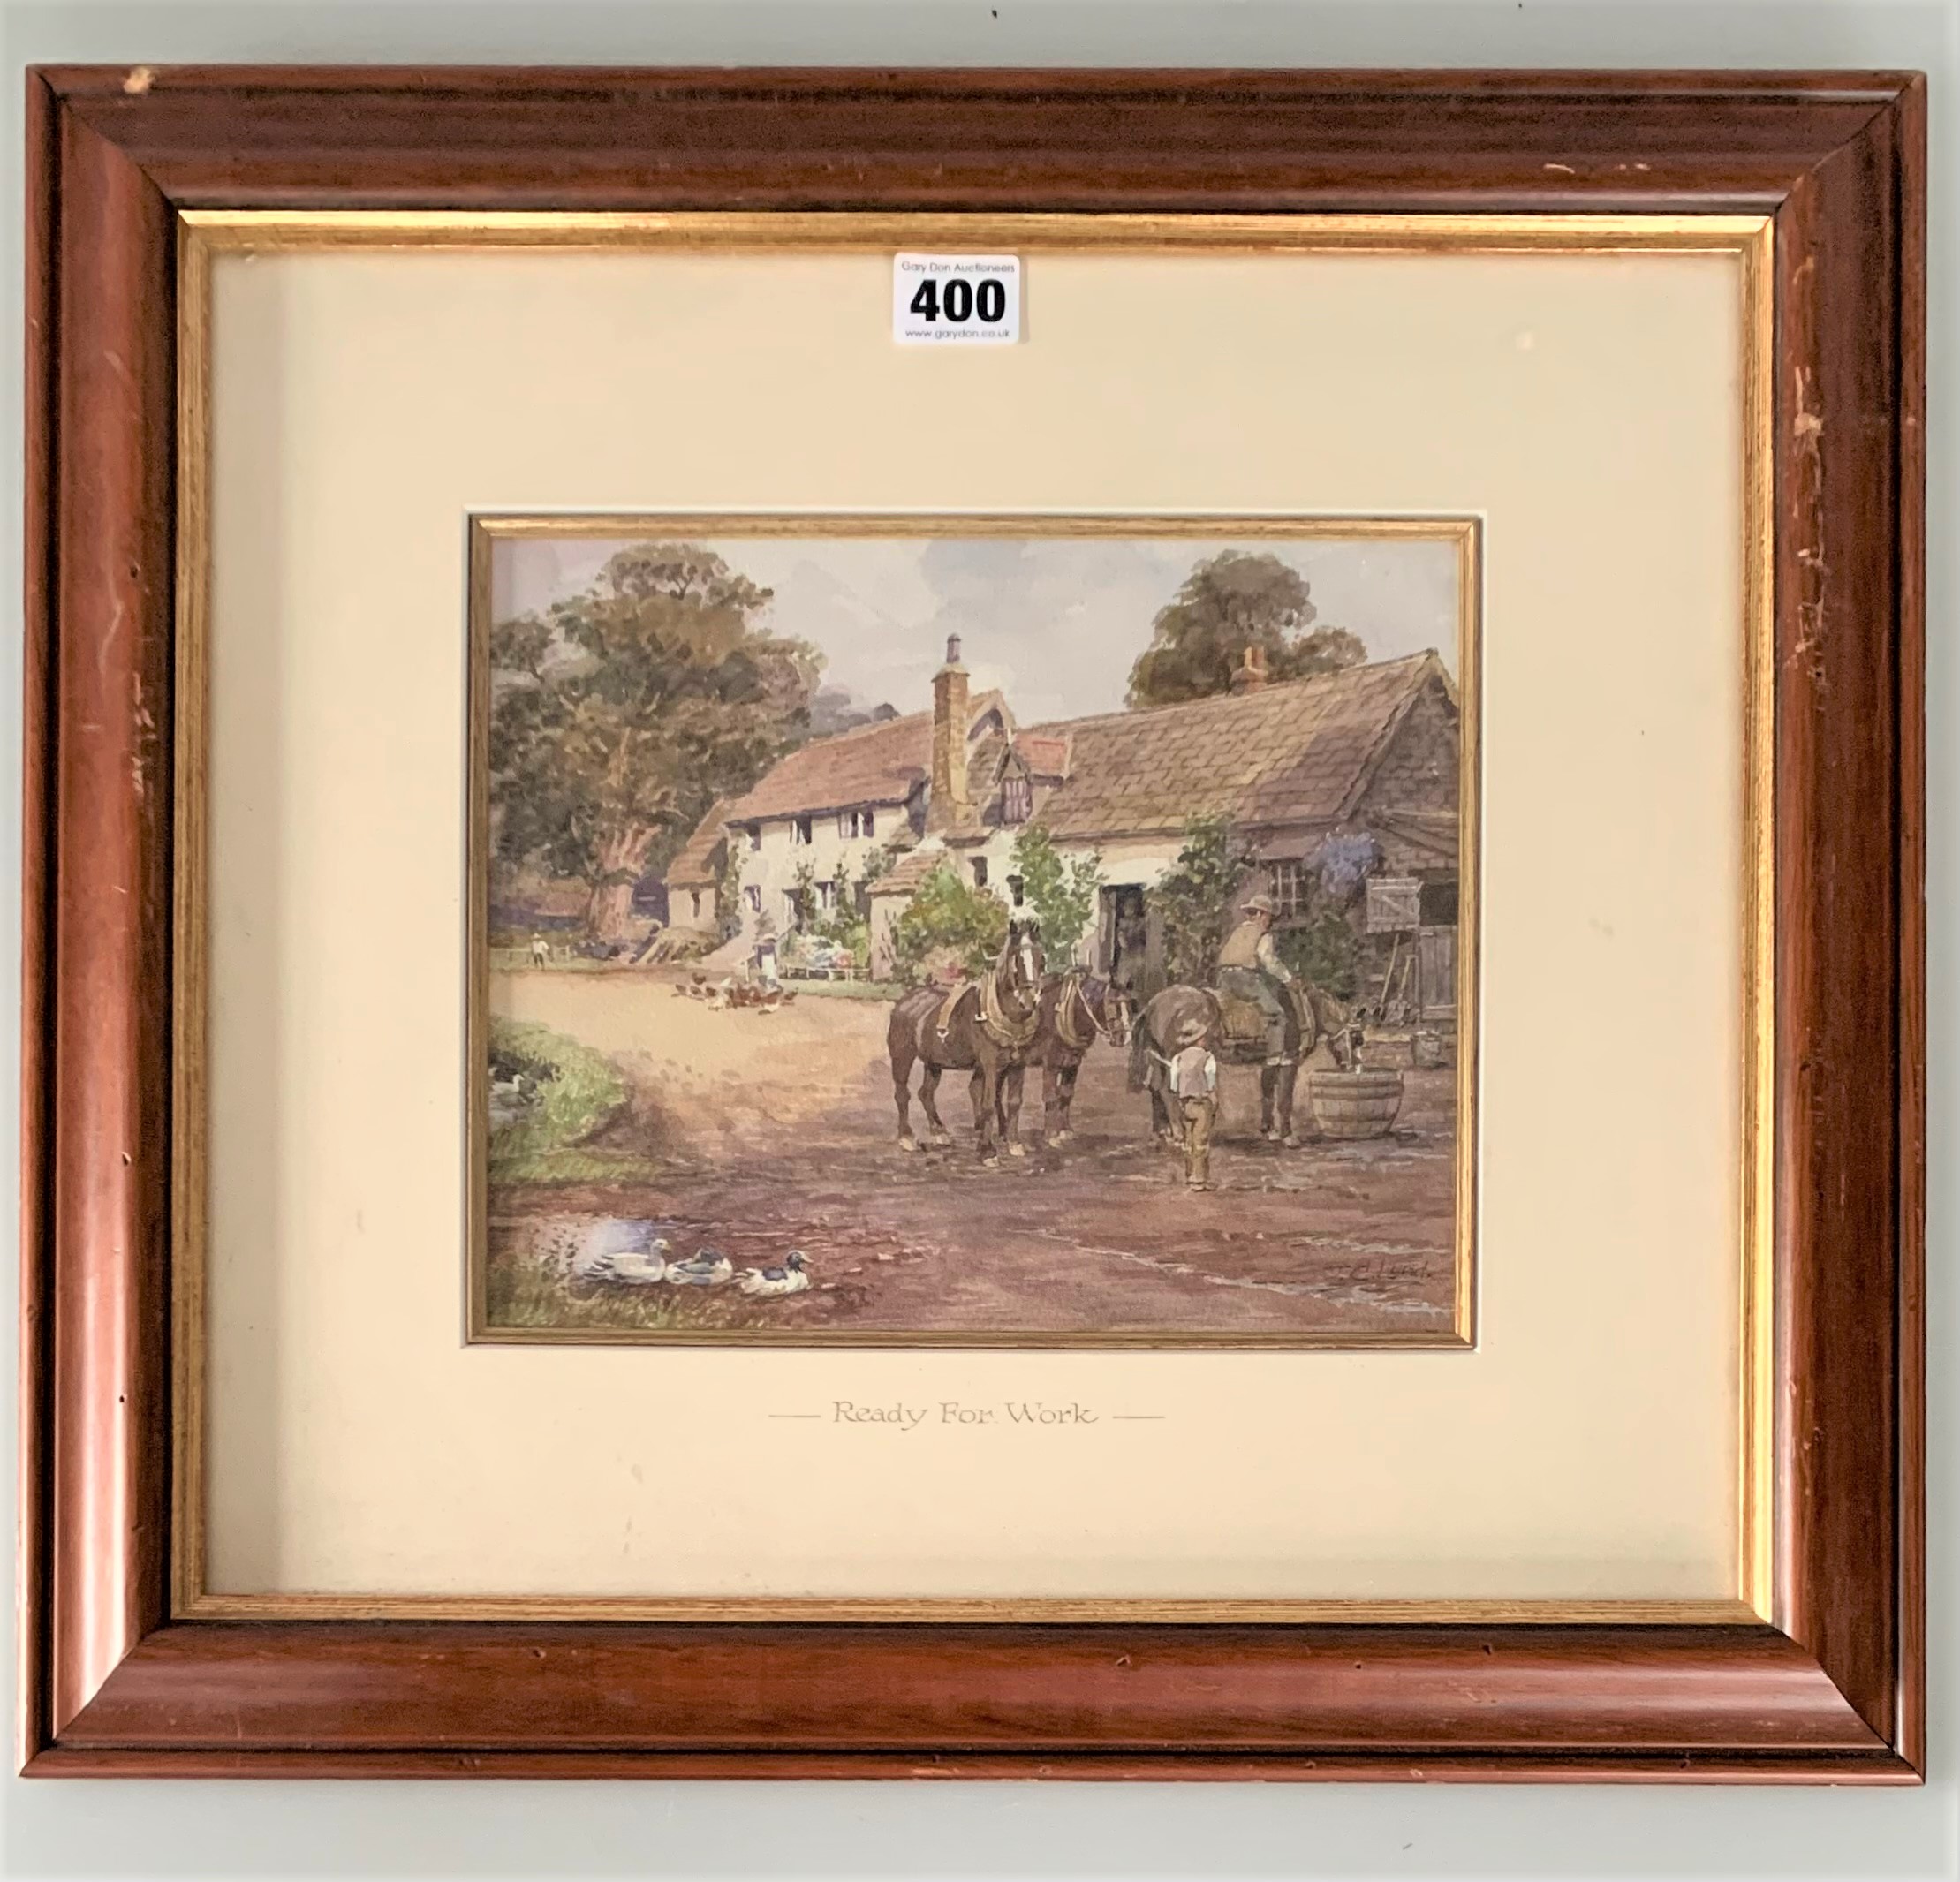 Watercolour ‘Ready For Work’ signed by J. C. Lund. image 9.5” x 8”, frame 18.5” x 16.5”